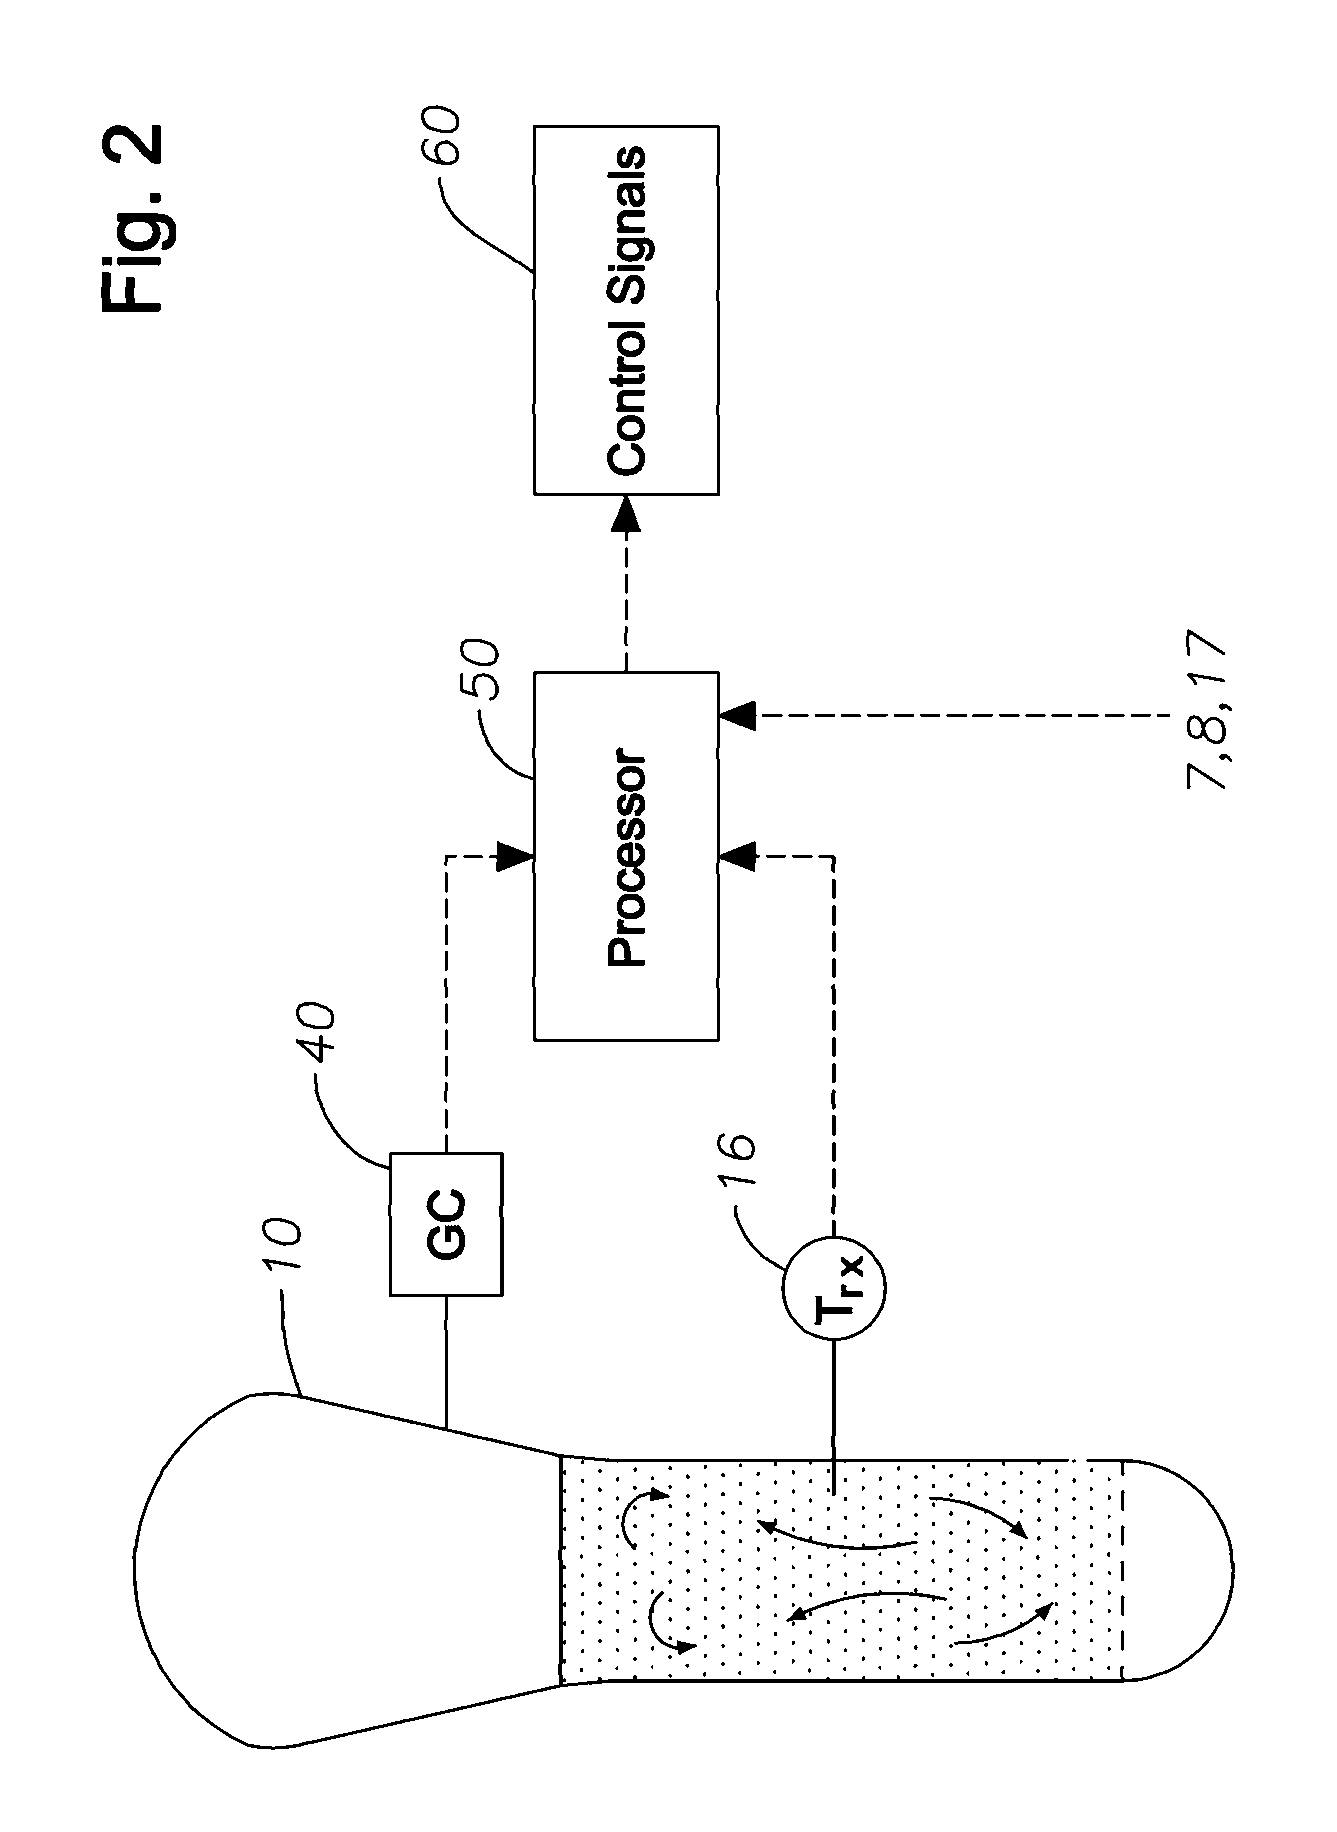 Method for reducing and/or preventing production of excessively low density polymer product during polymerization transitions